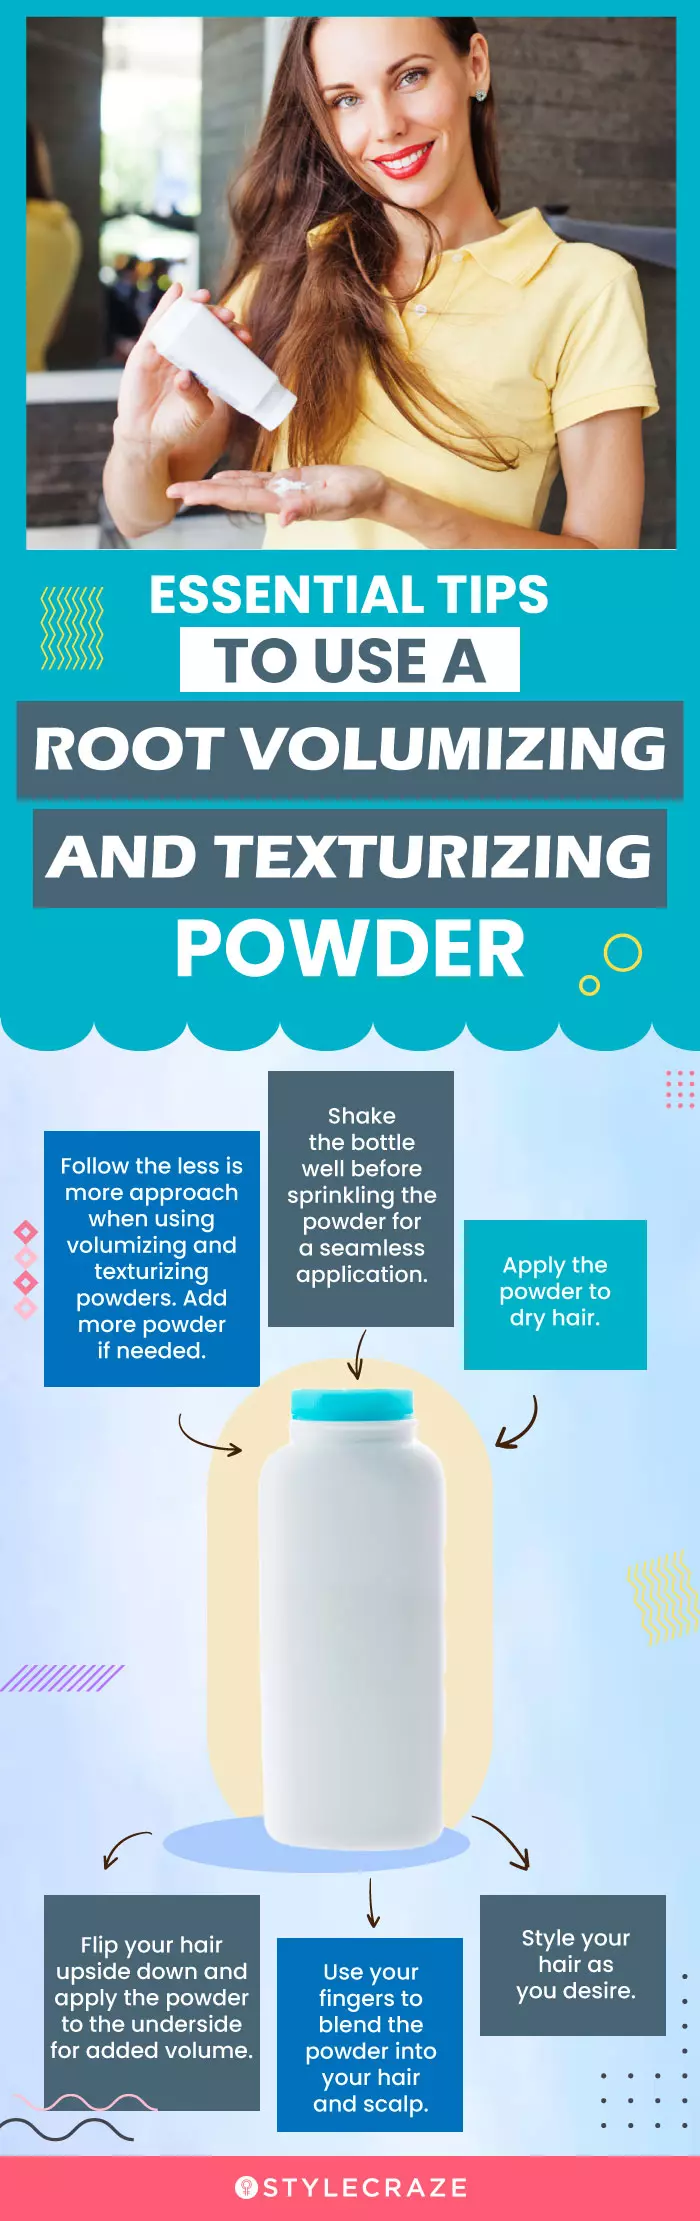 Essential Tips To Use A Root Volumizing And Texturizing Powder (infographic)